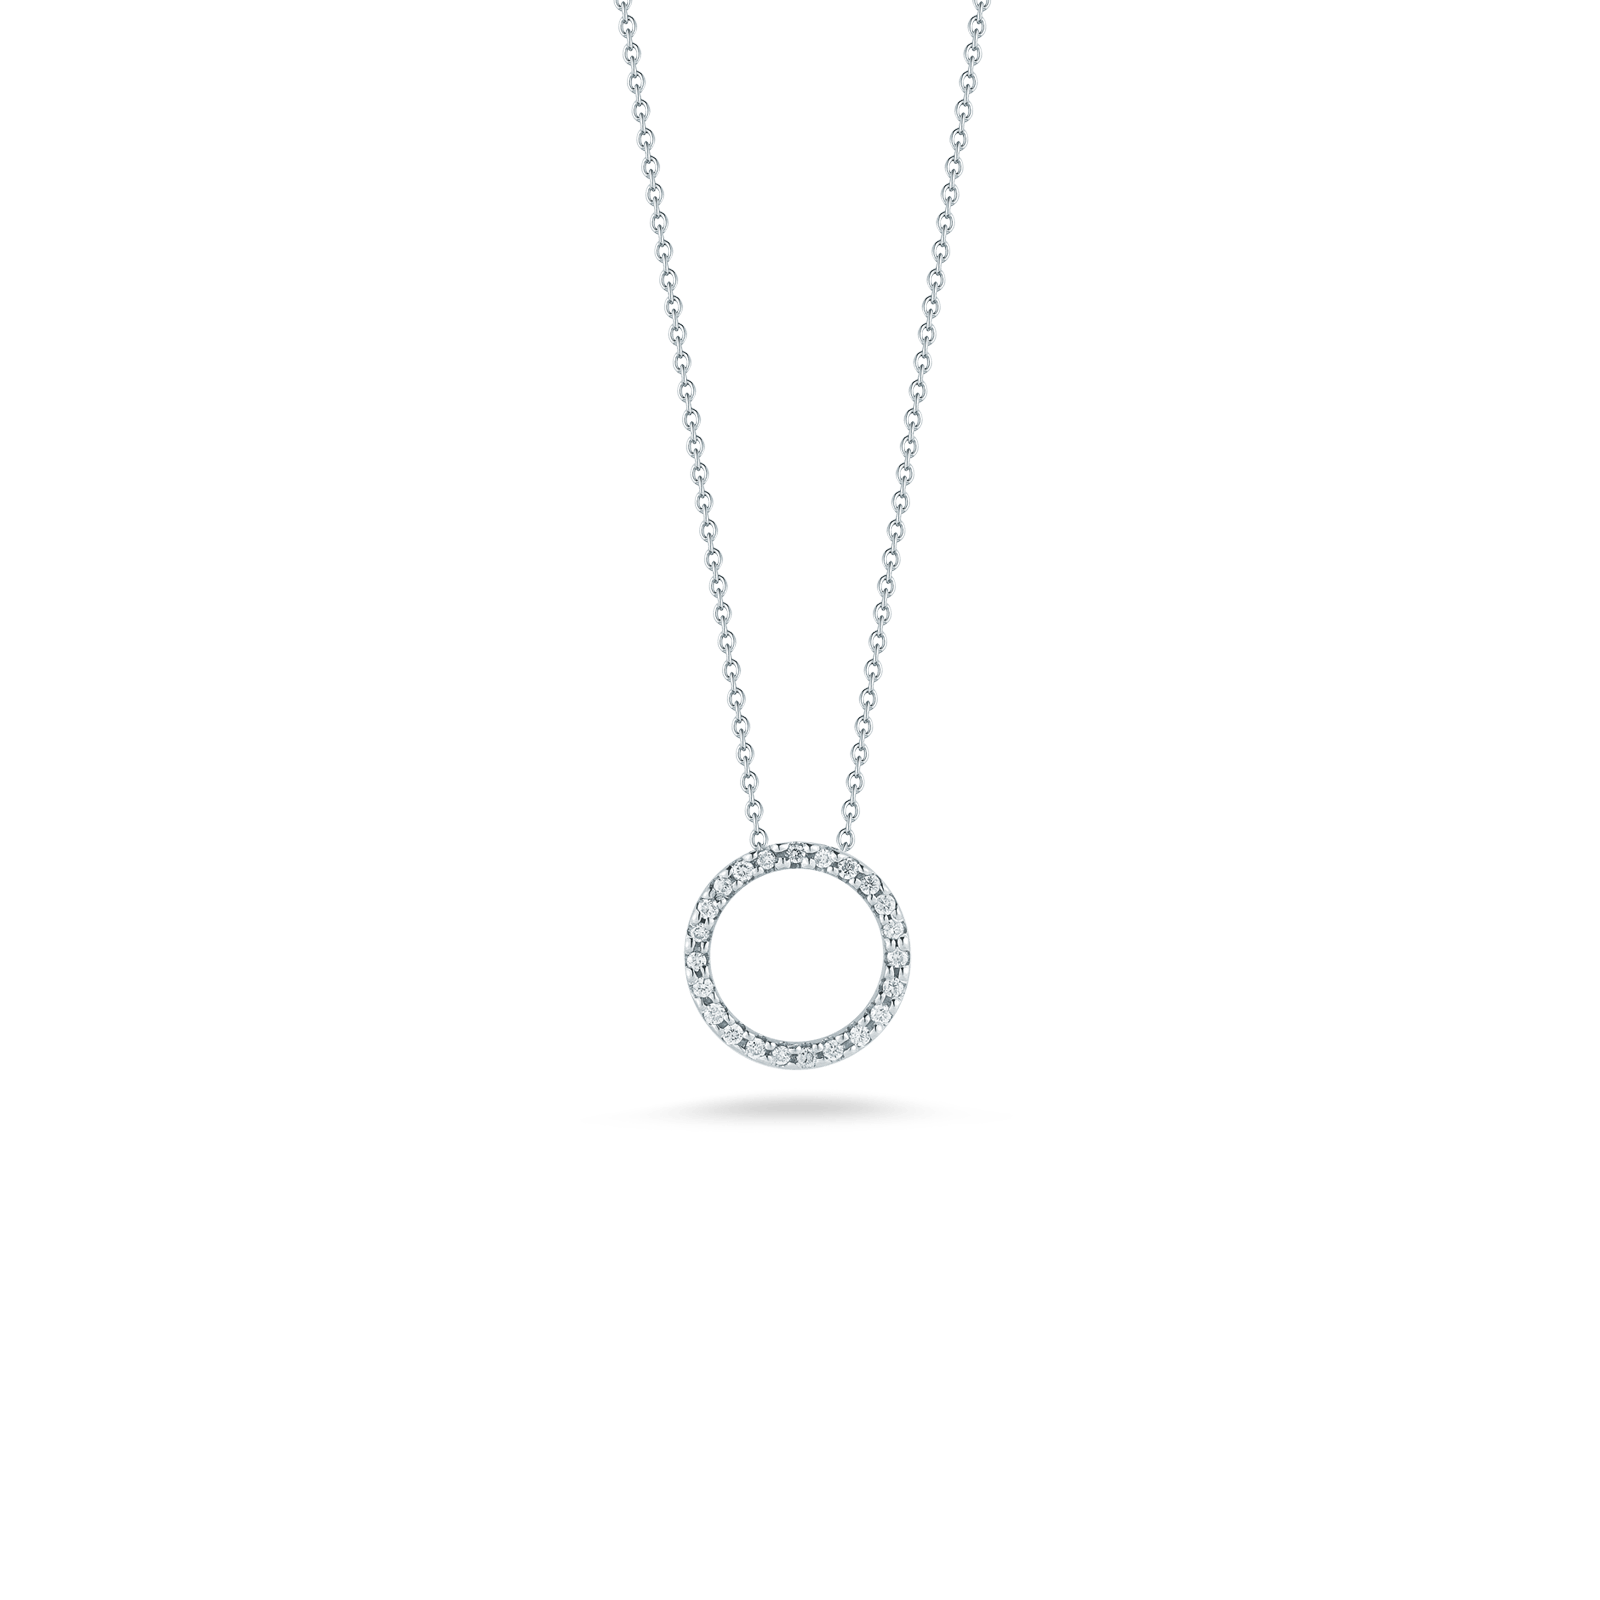 Buy Box Round Rolo Chain 3mm Fine 14k White Gold Necklace Women Men Jewelry  Strong Solid Plated Clasp Gift with Lobster Clasp (18) at Amazon.in